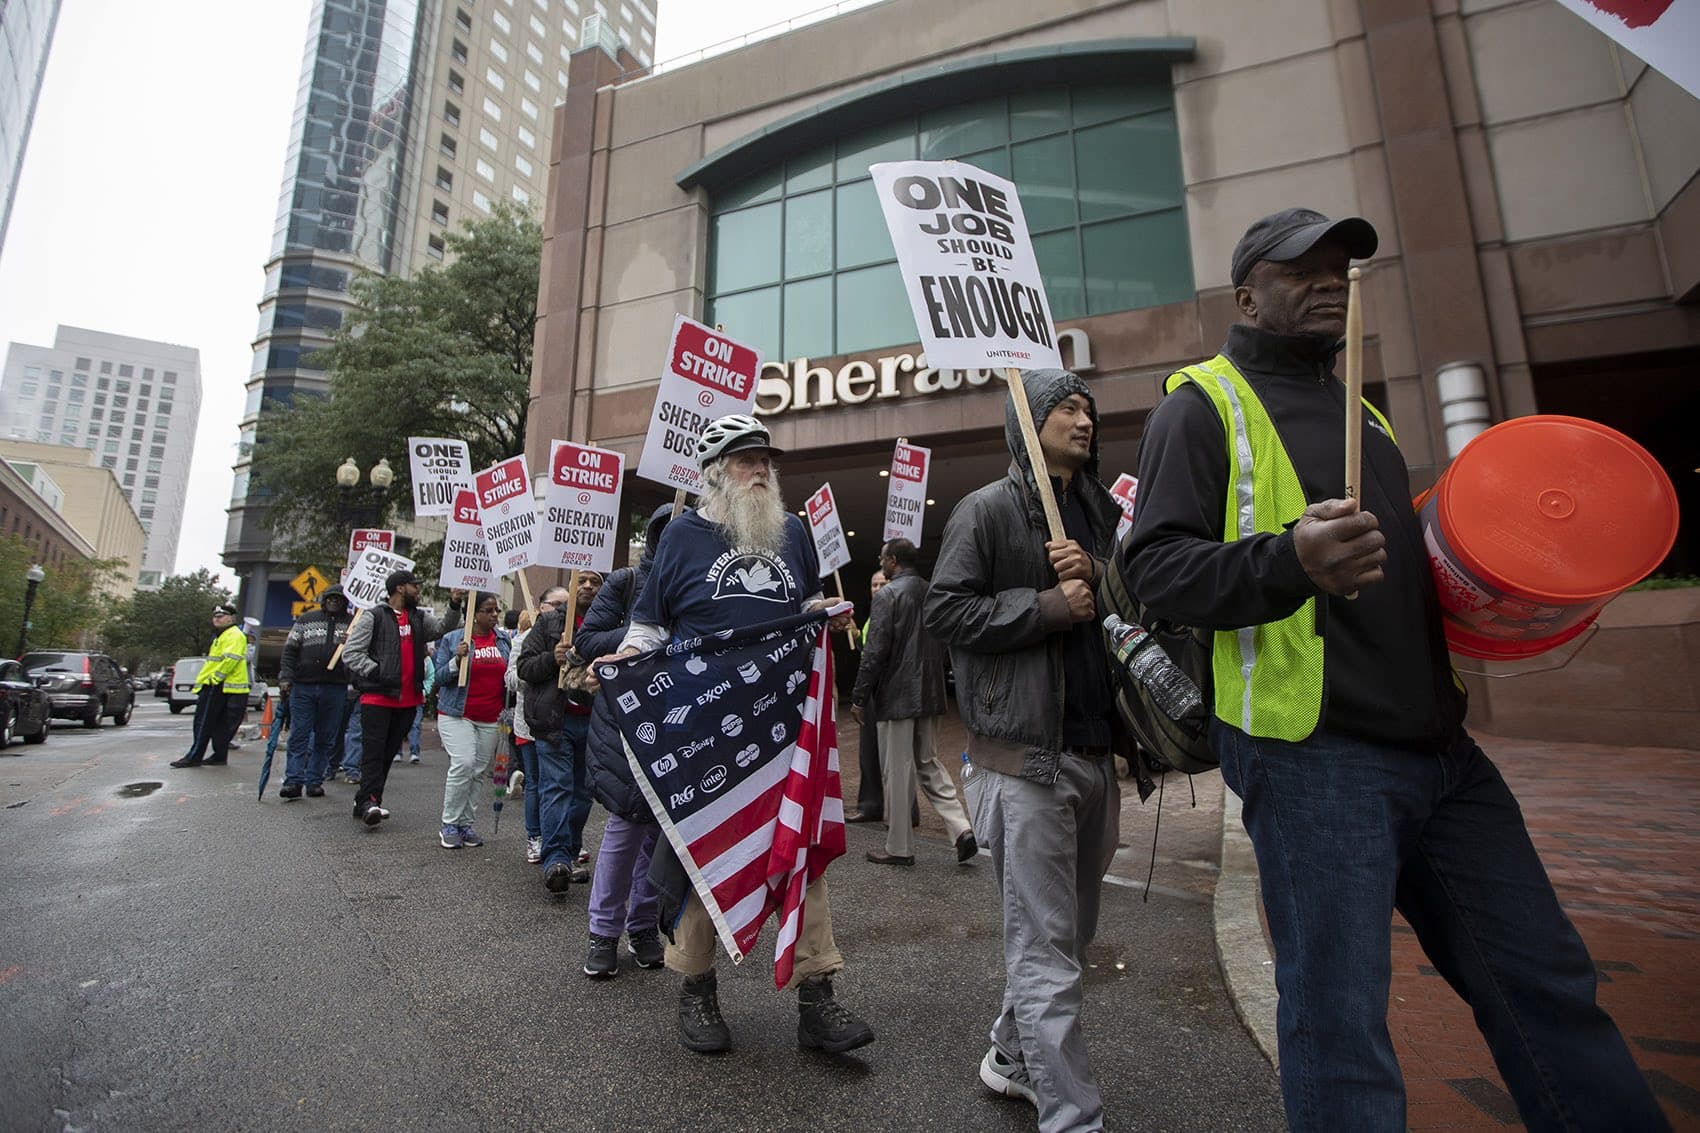 Marriott workers picketing outside of the Sheraton Boston in the morning on Oct. 3, 2018. (Jesse Costa/WBUR)